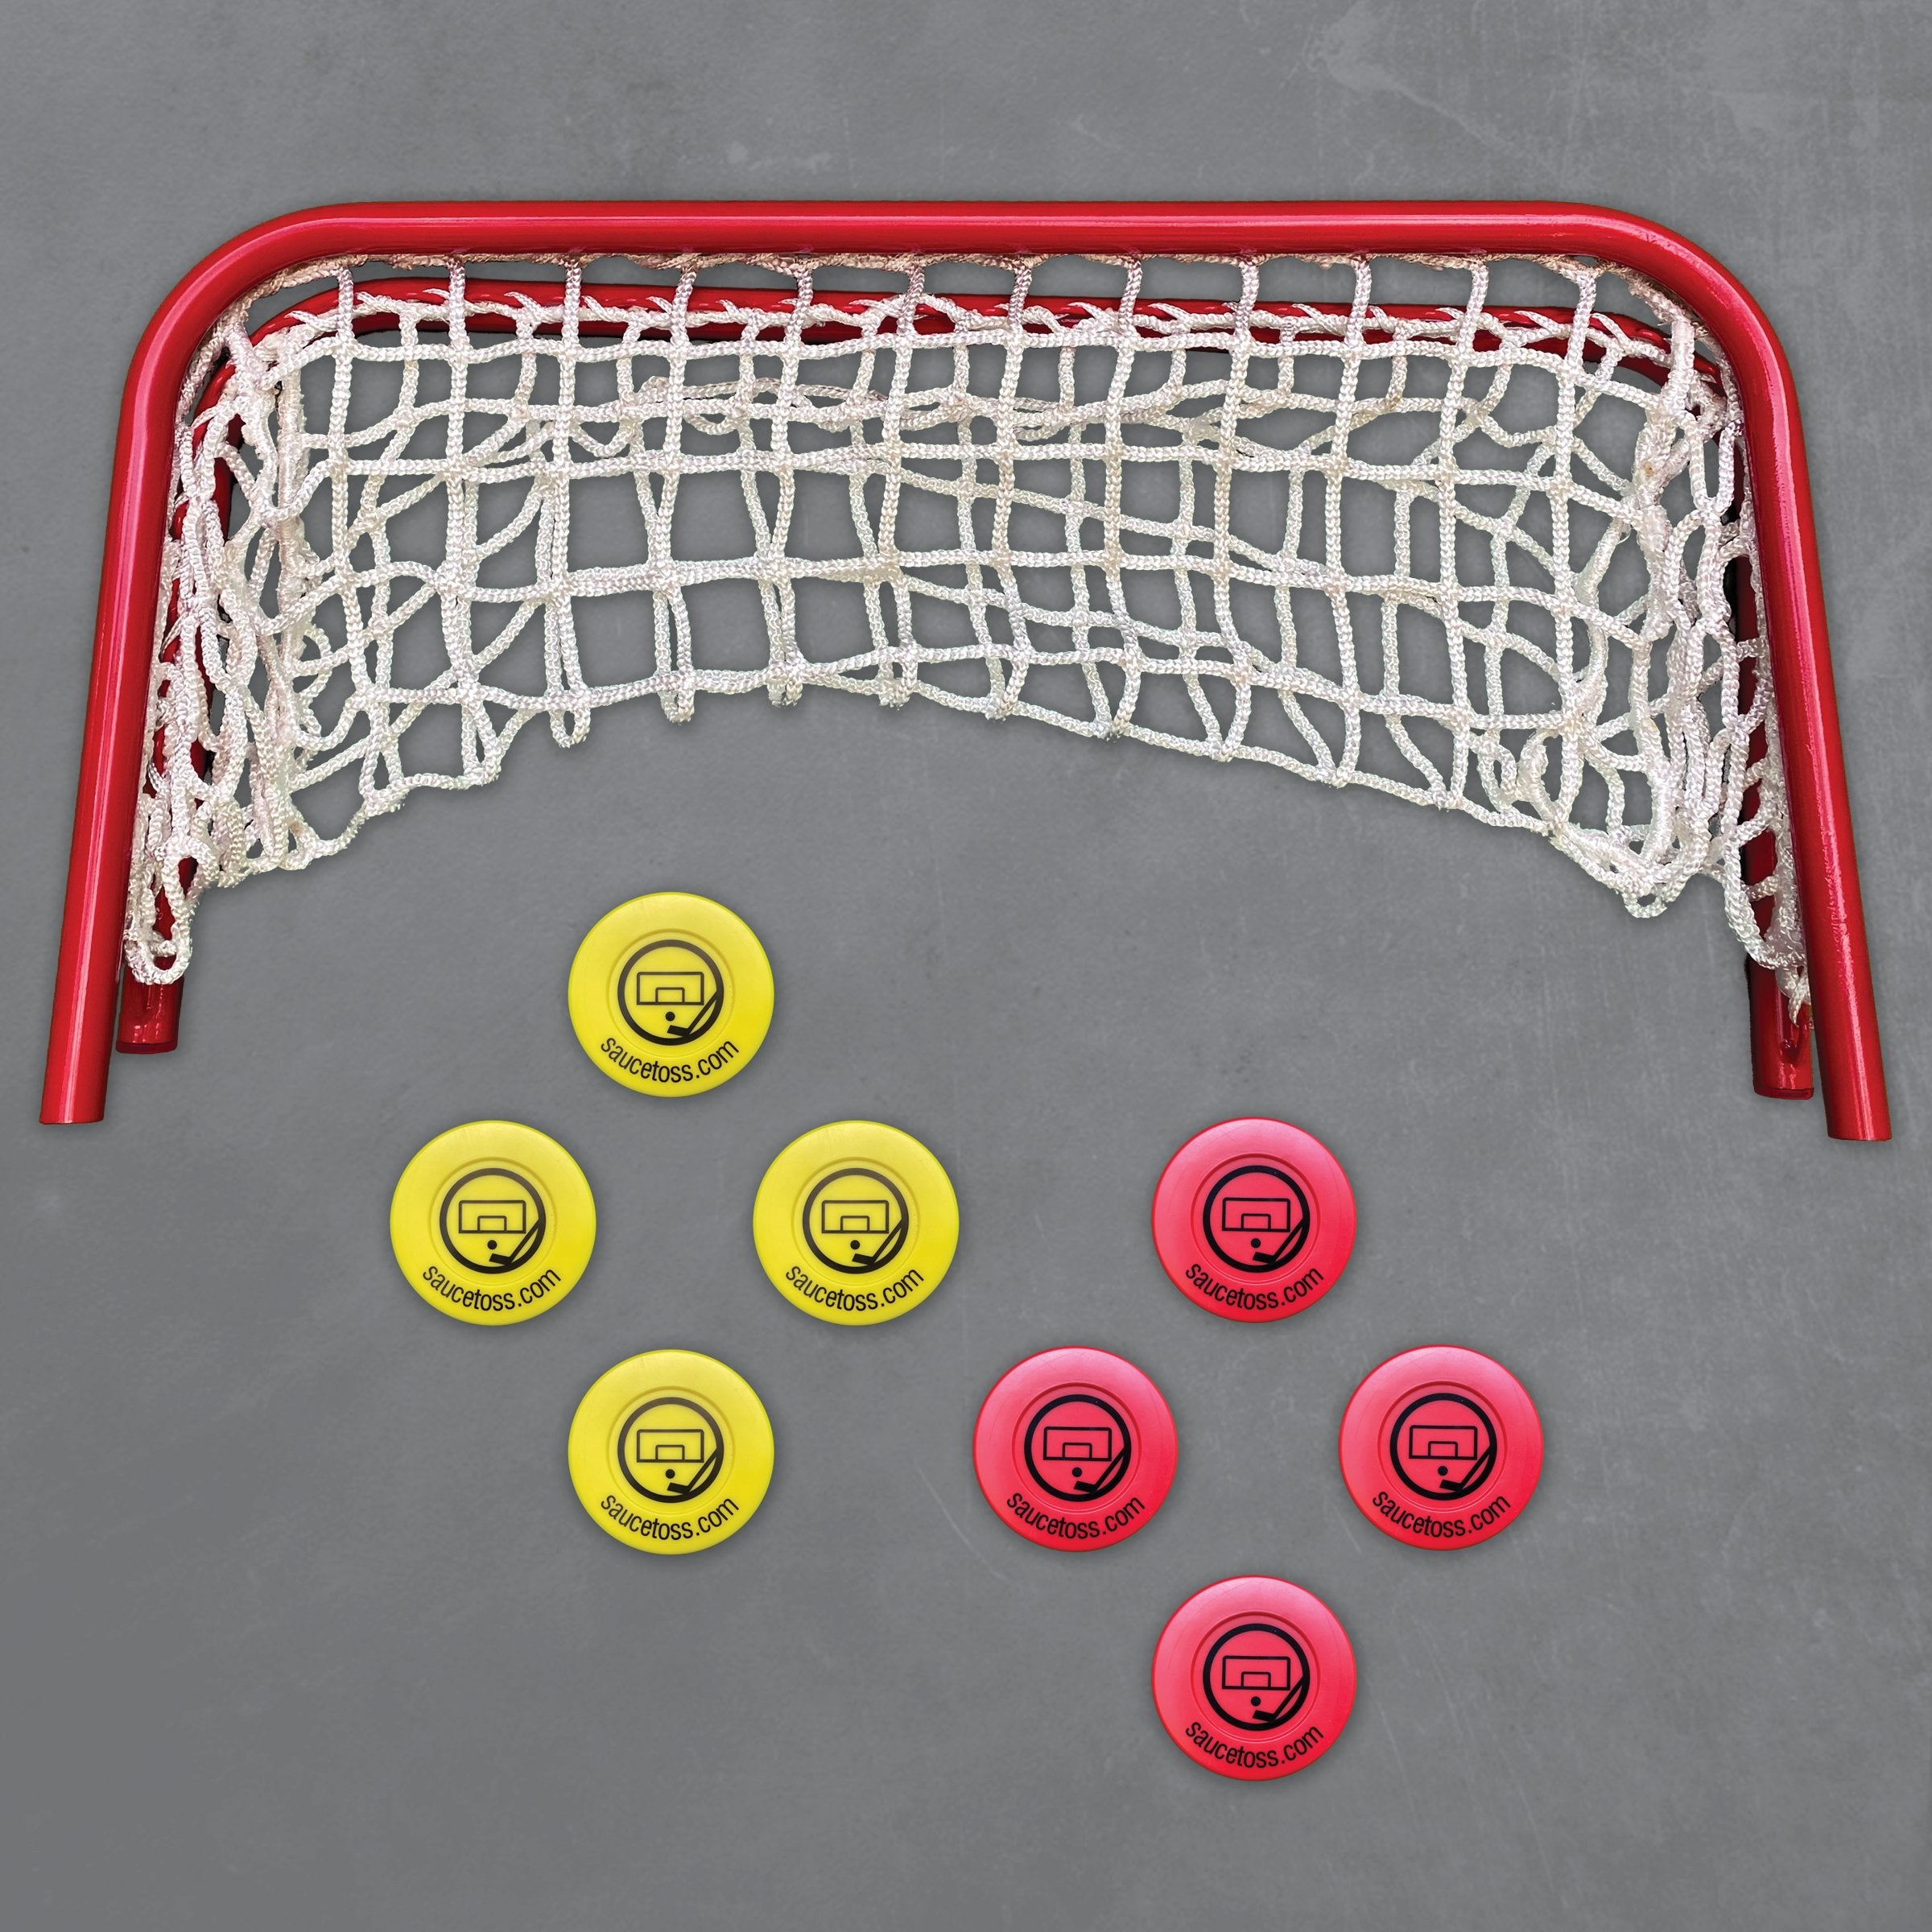 8 pucks and a net on grey backgorund